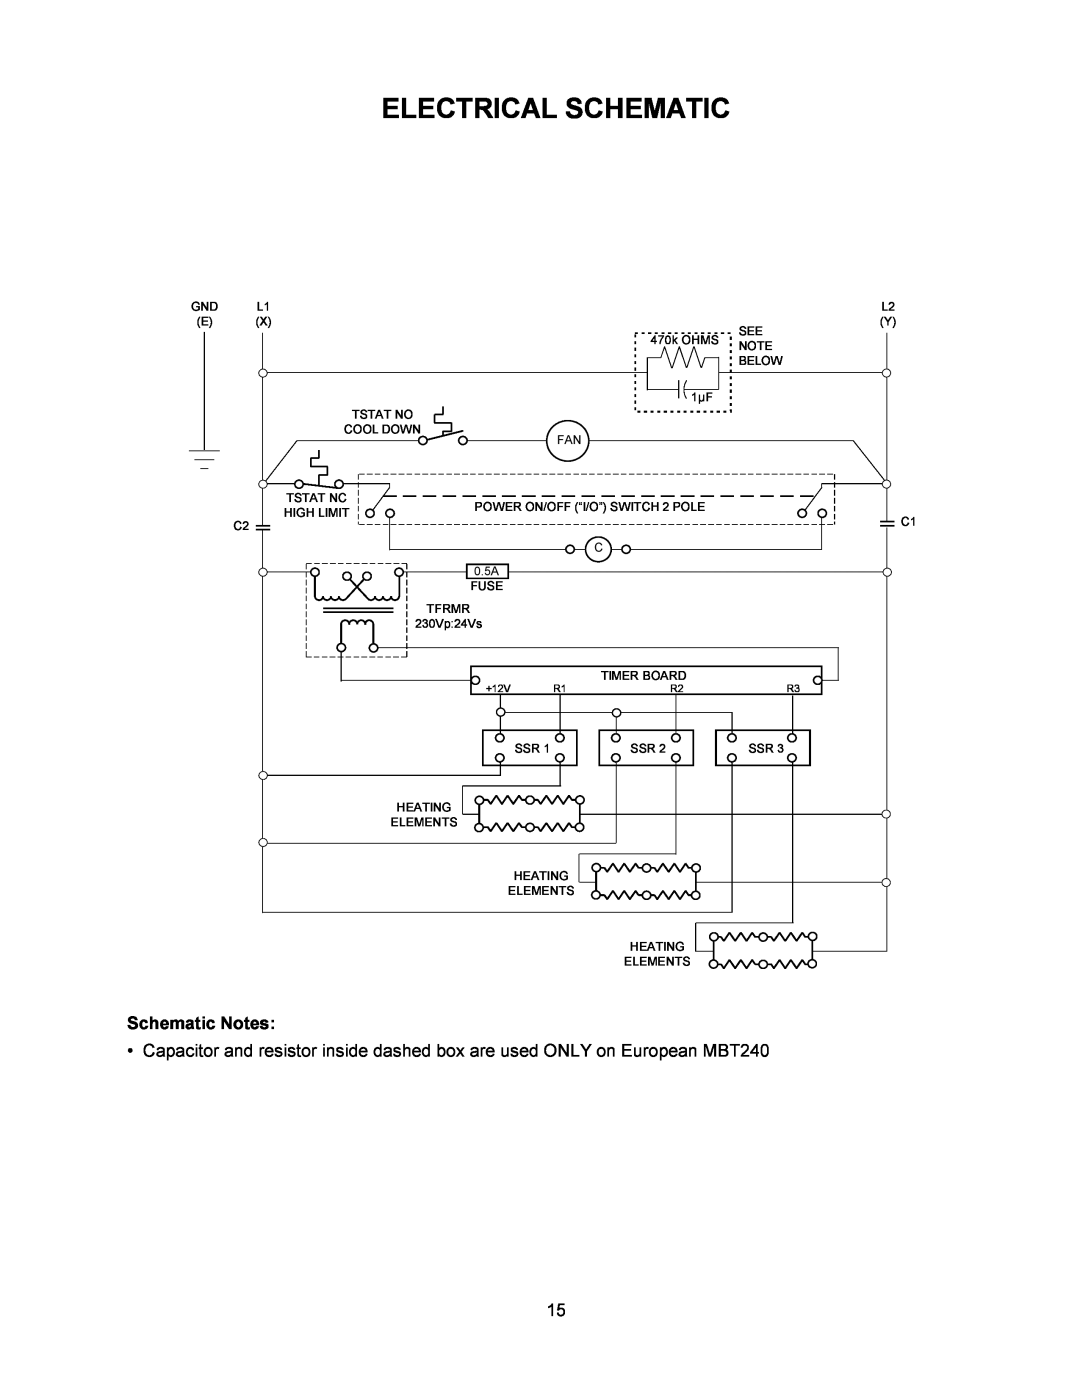 Toastmaster MBT208, MBT240 warranty Electrical Schematic, Schematic Notes 